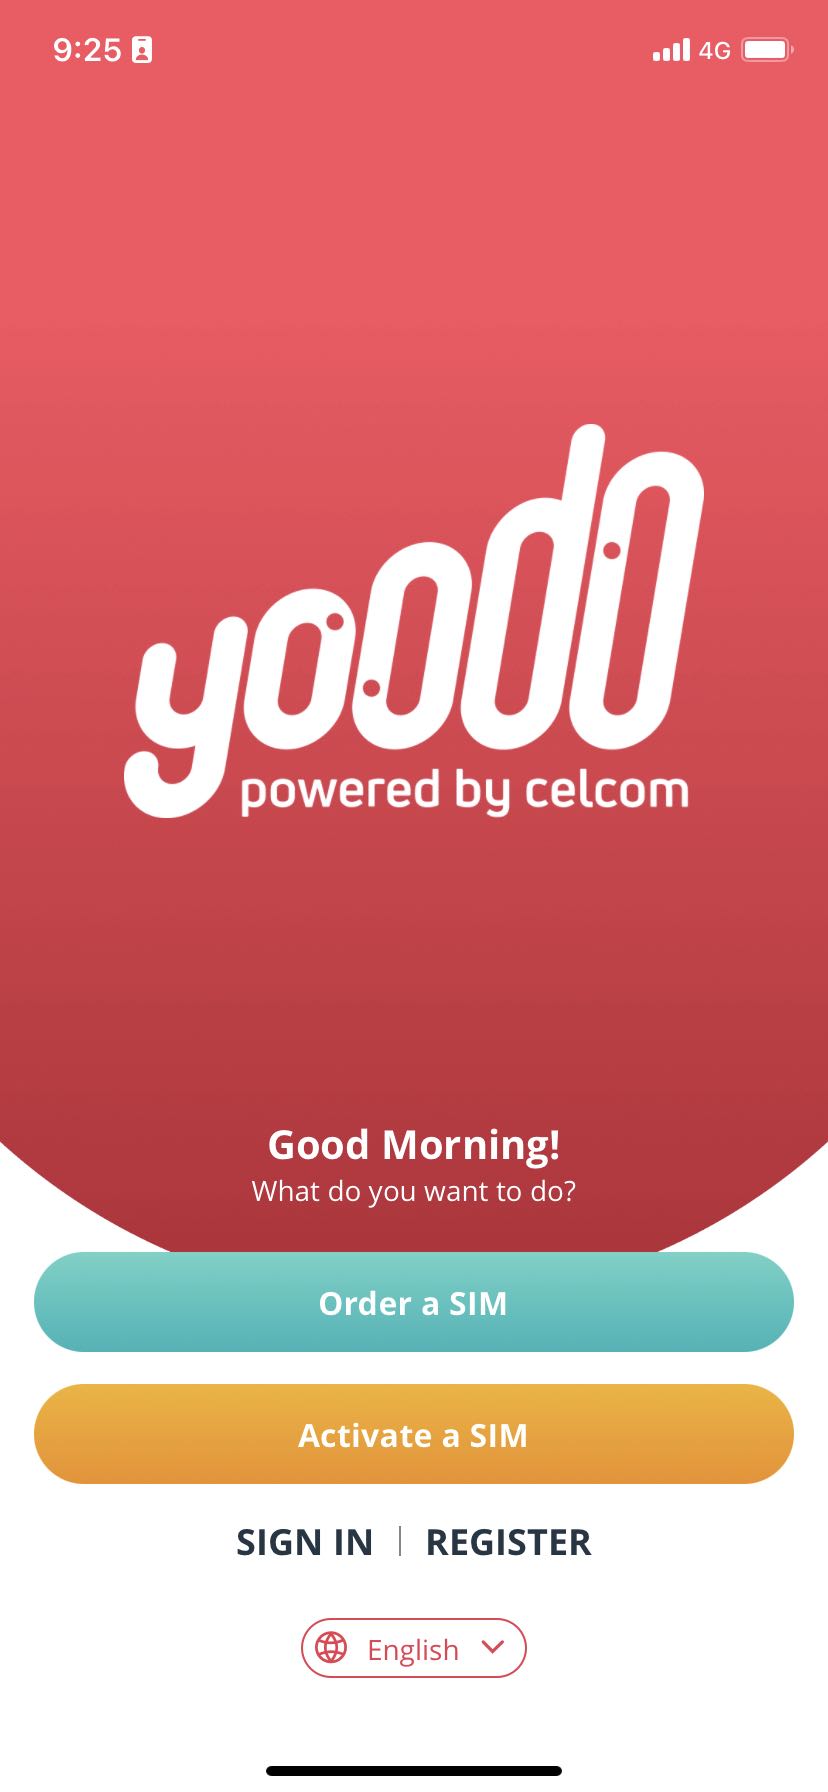 download yoodo app to sign up for an account before ordering a sim to redeem lalamove rewards for drivers